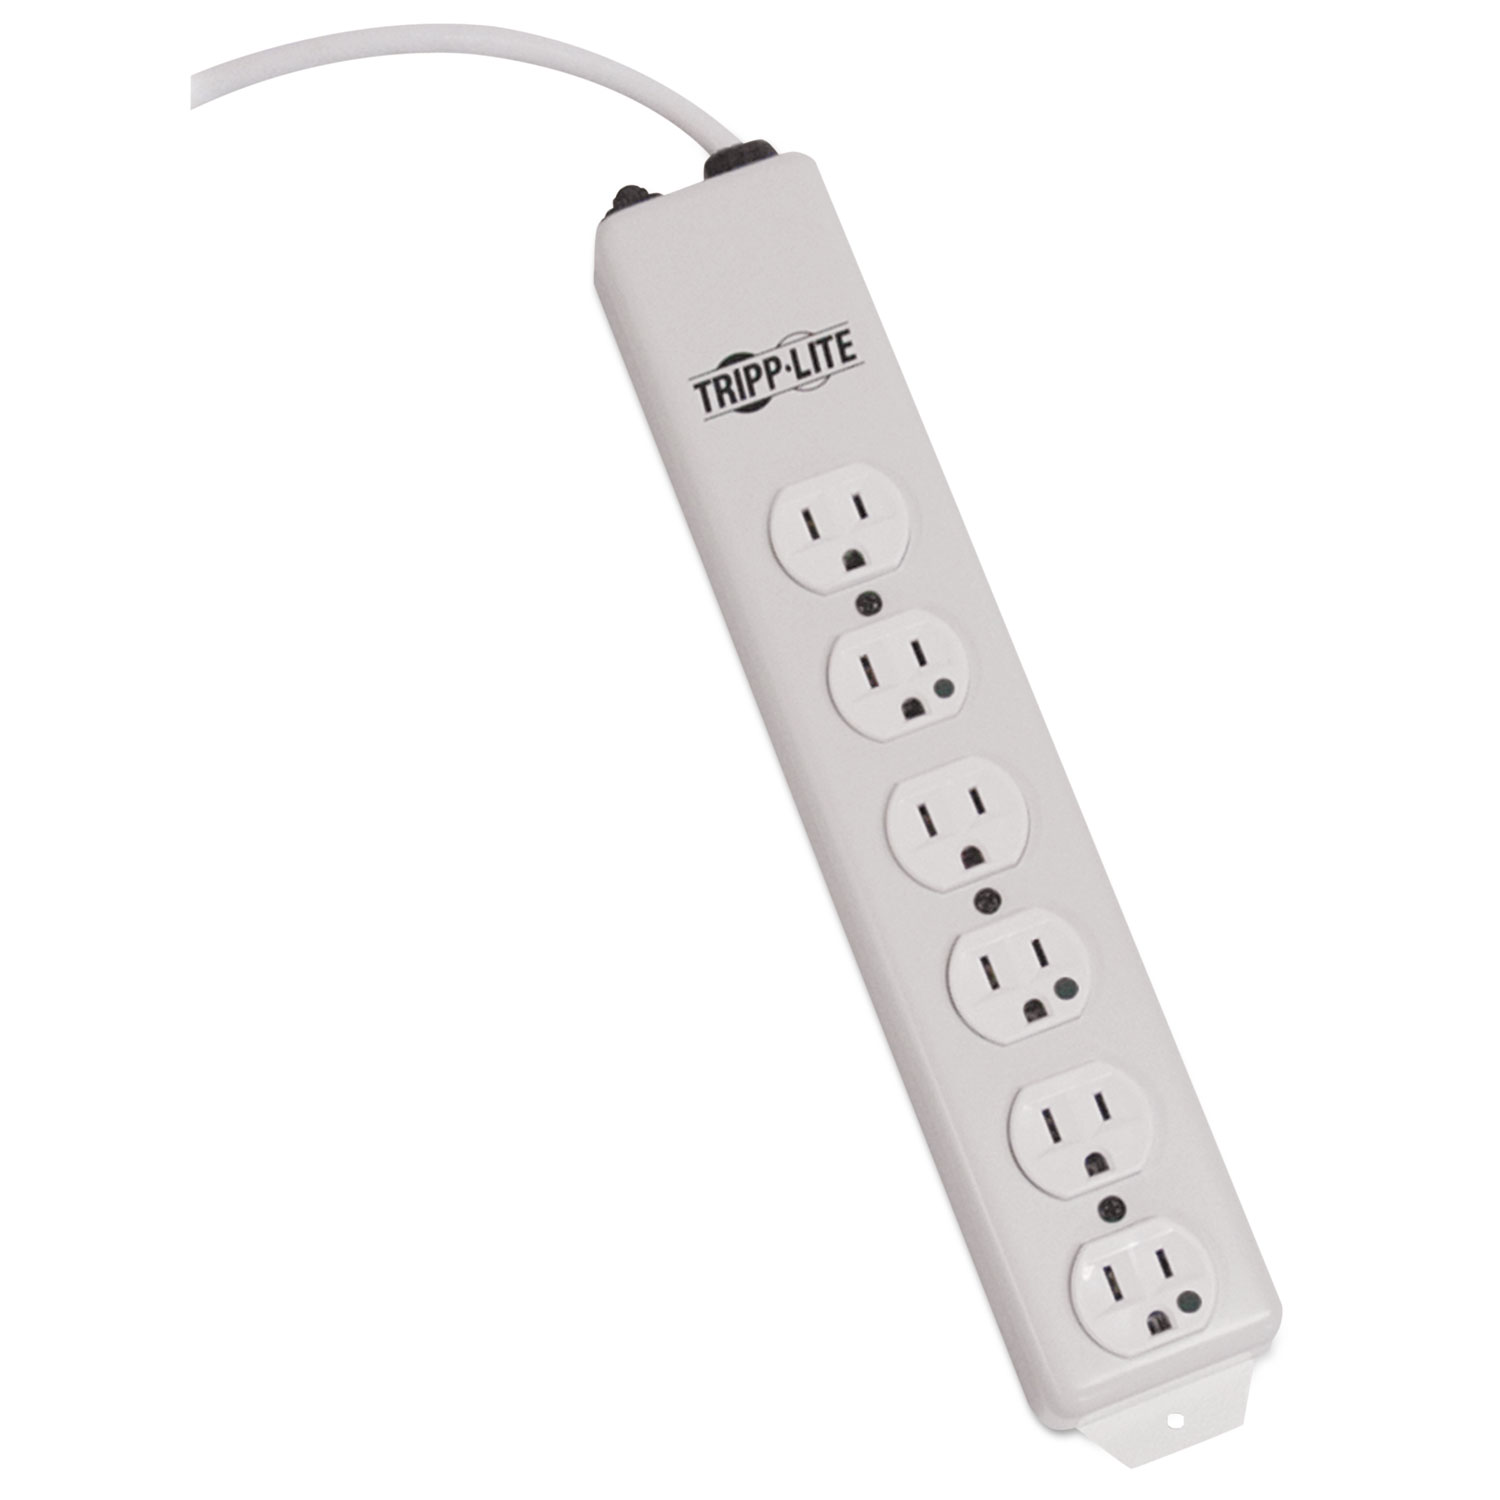  Tripp Lite PS-606-HG Medical-Grade Power Strip Not for Patient-Care Vicinity, 6 Outlets, 6 ft. Cord (TRPPS606HG) 